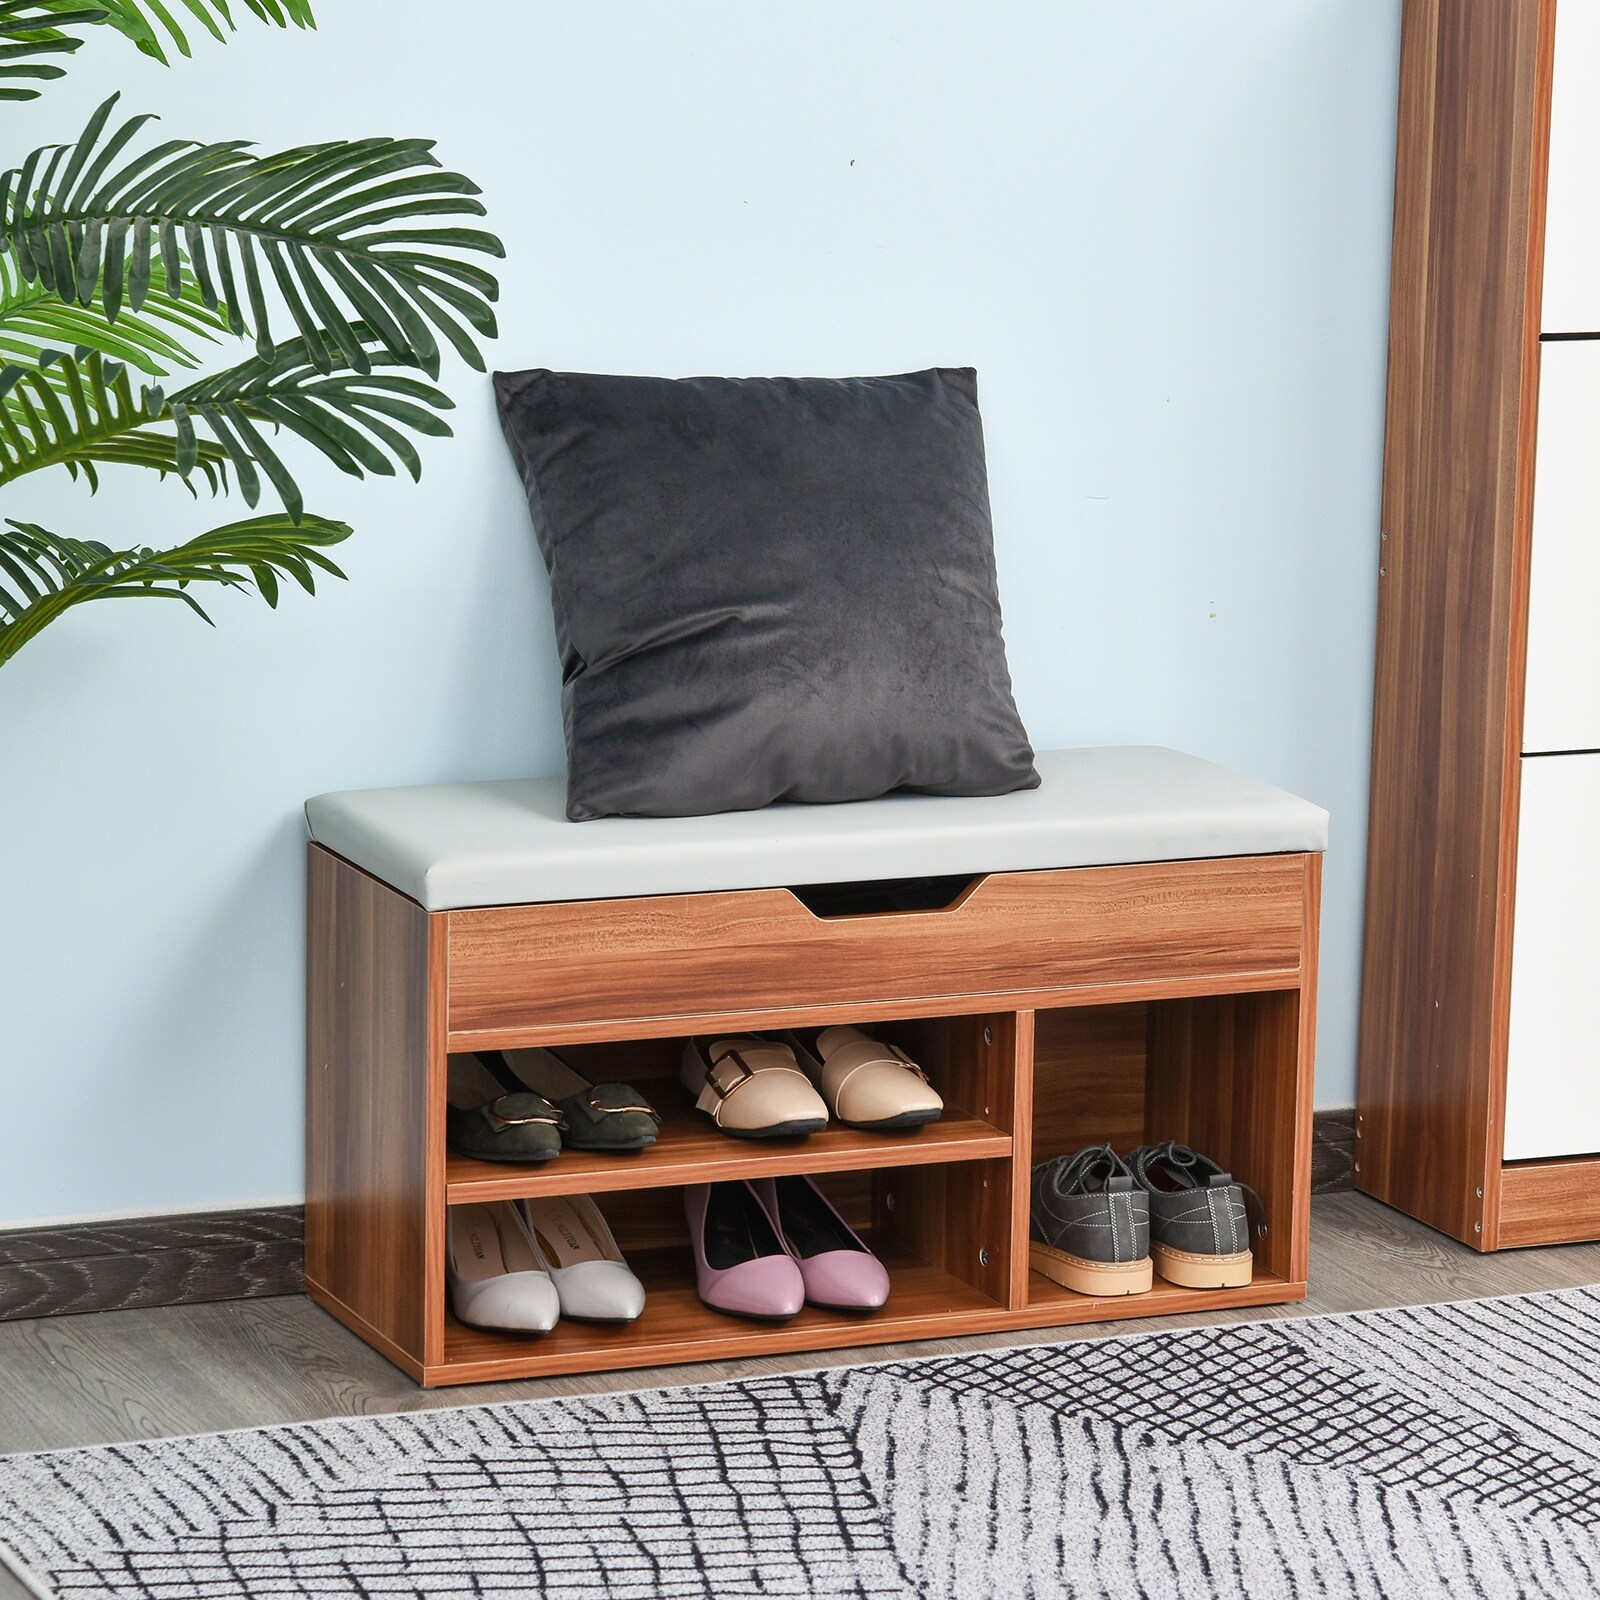 Beech 2 Drawers Hallway Shoe Storage Bench,Shoes Cabinet White//Oak Shoe Rack with Drawer and Seat Cushion Wooden